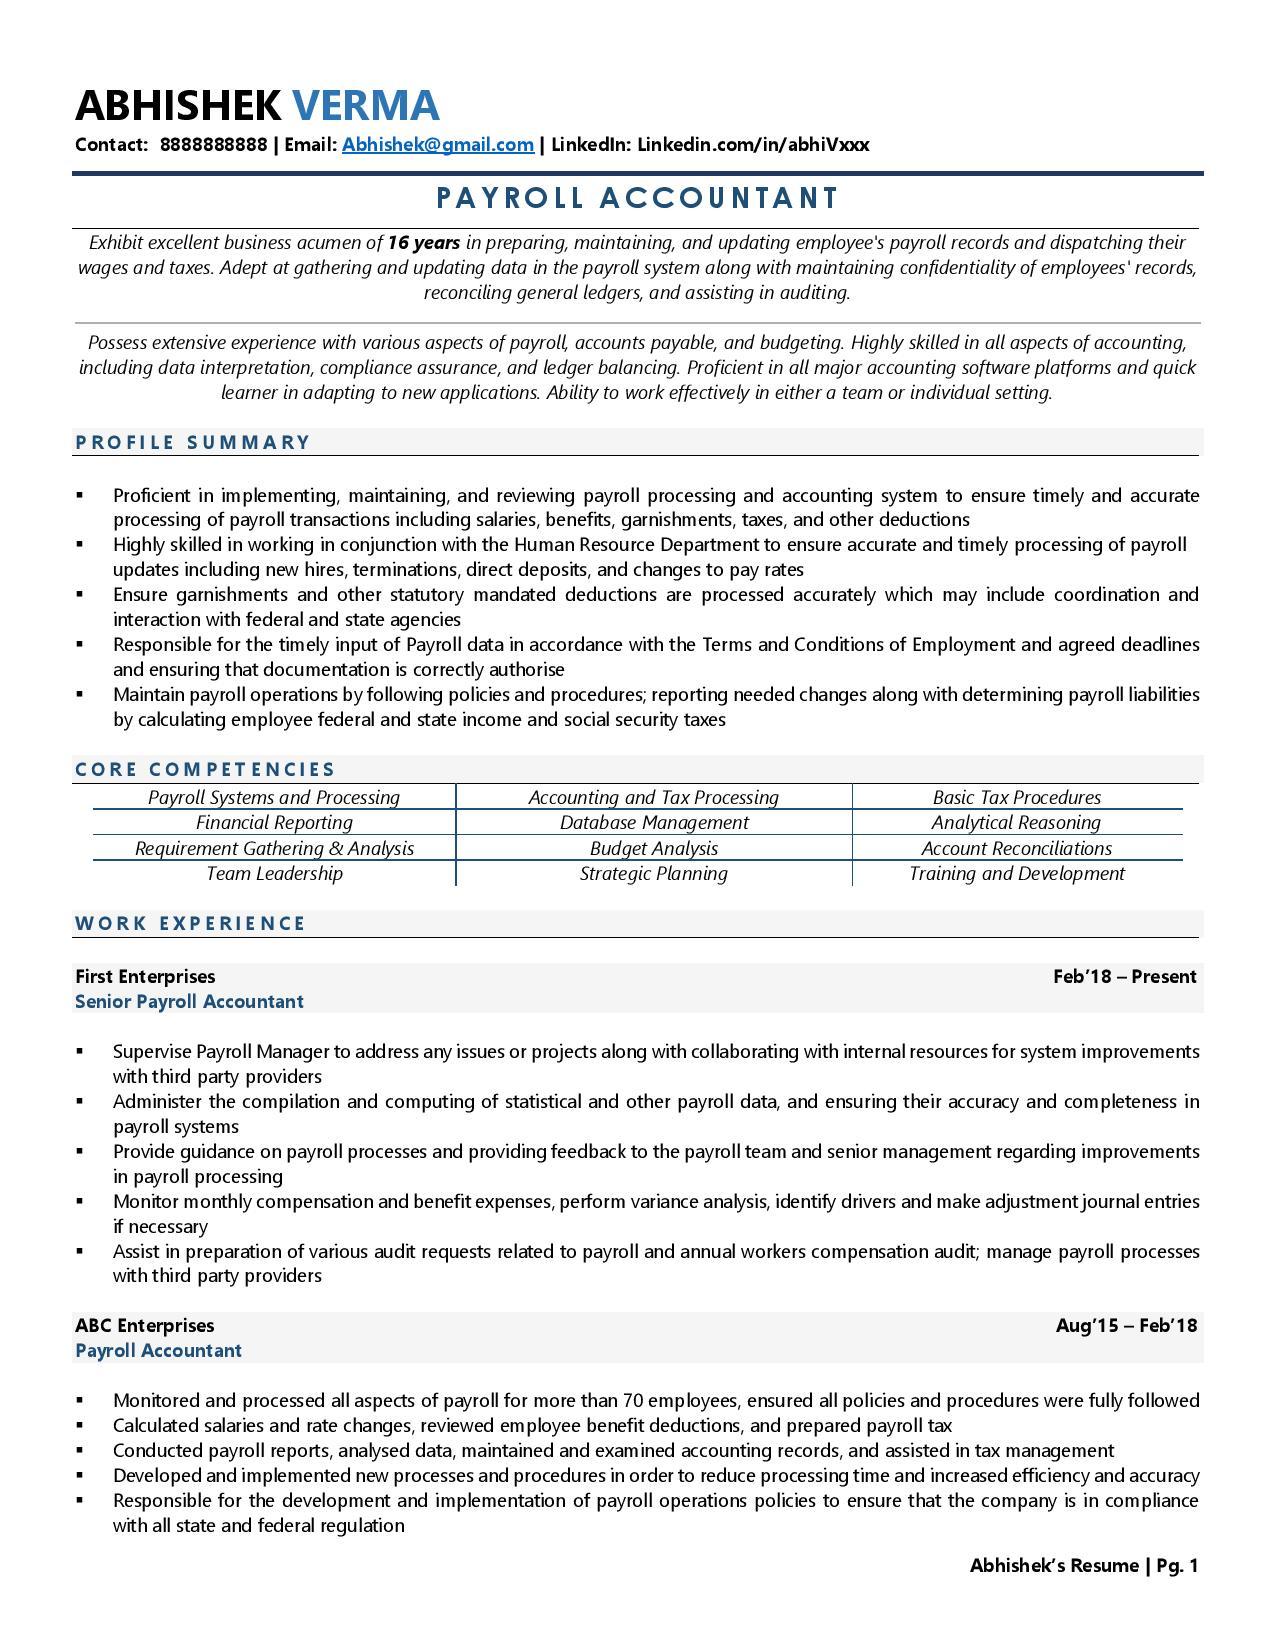 Payroll Accountant Resume Examples Template (with job winning tips)